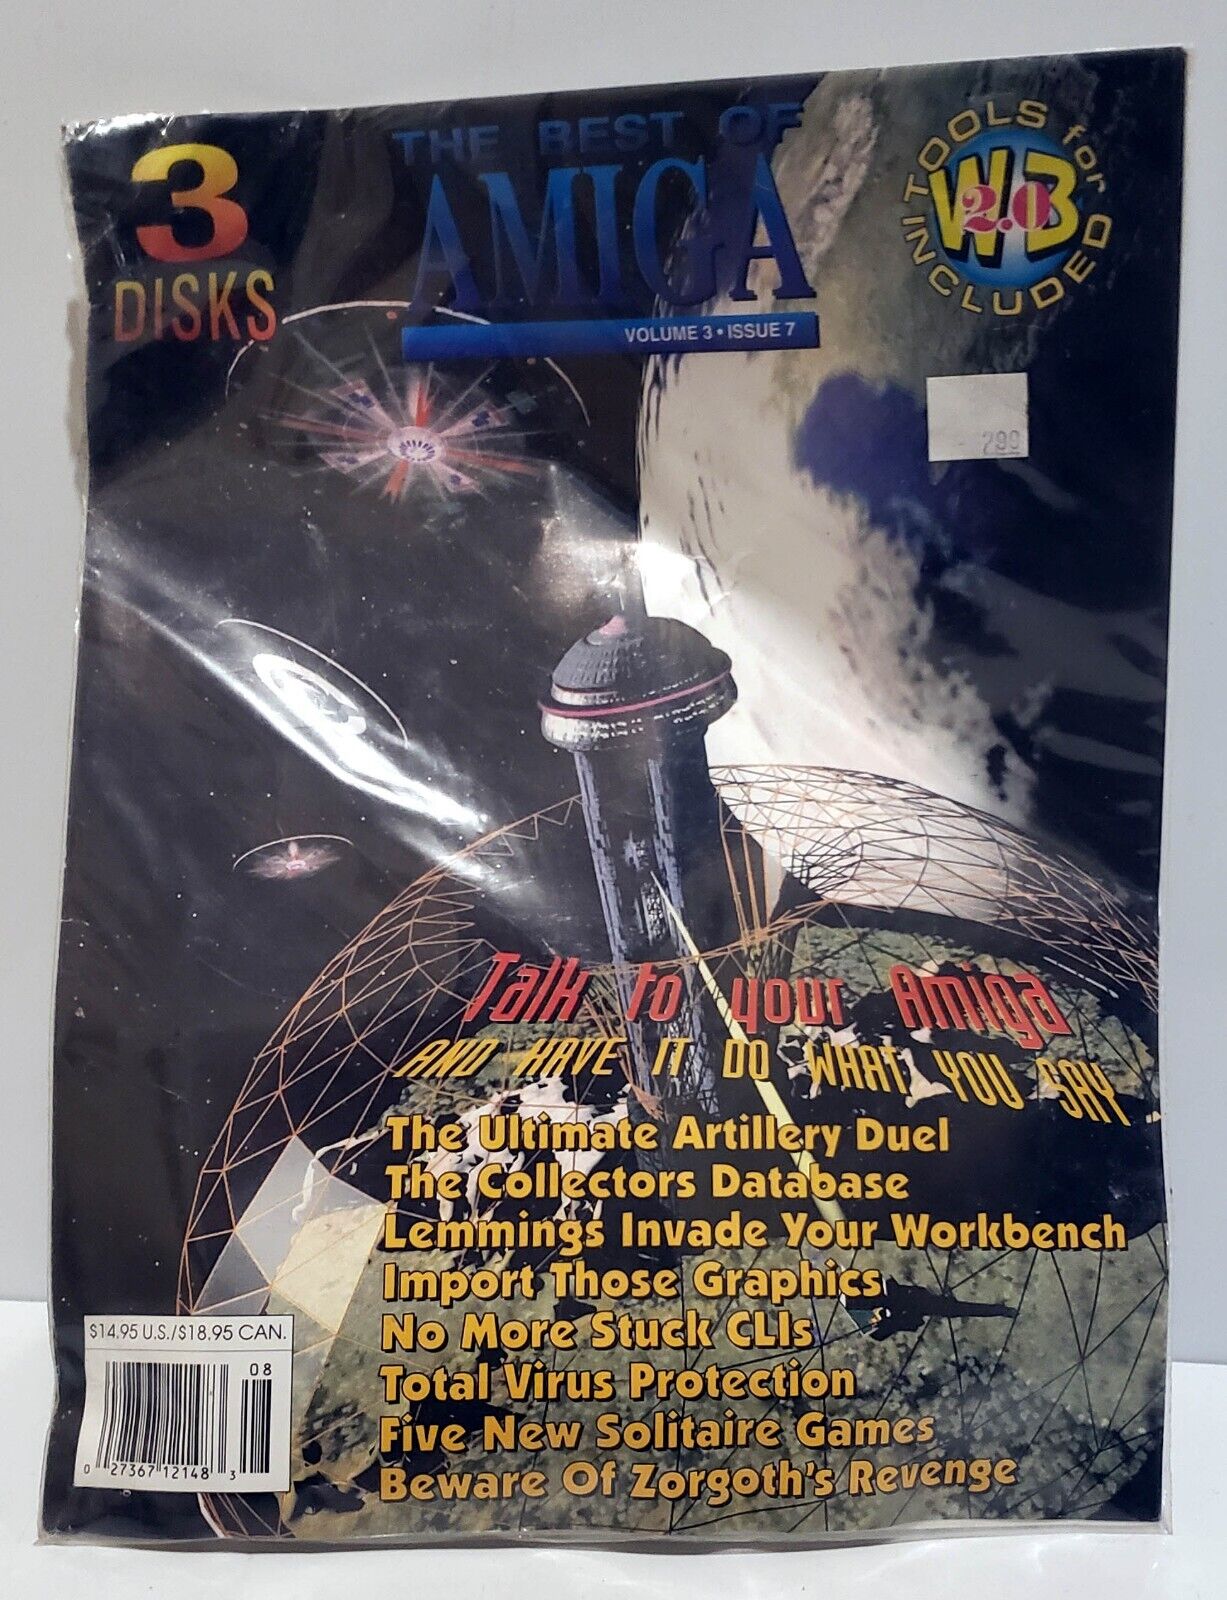 The Best of Amiga Volume 3 Issue 7 3 Disks Included